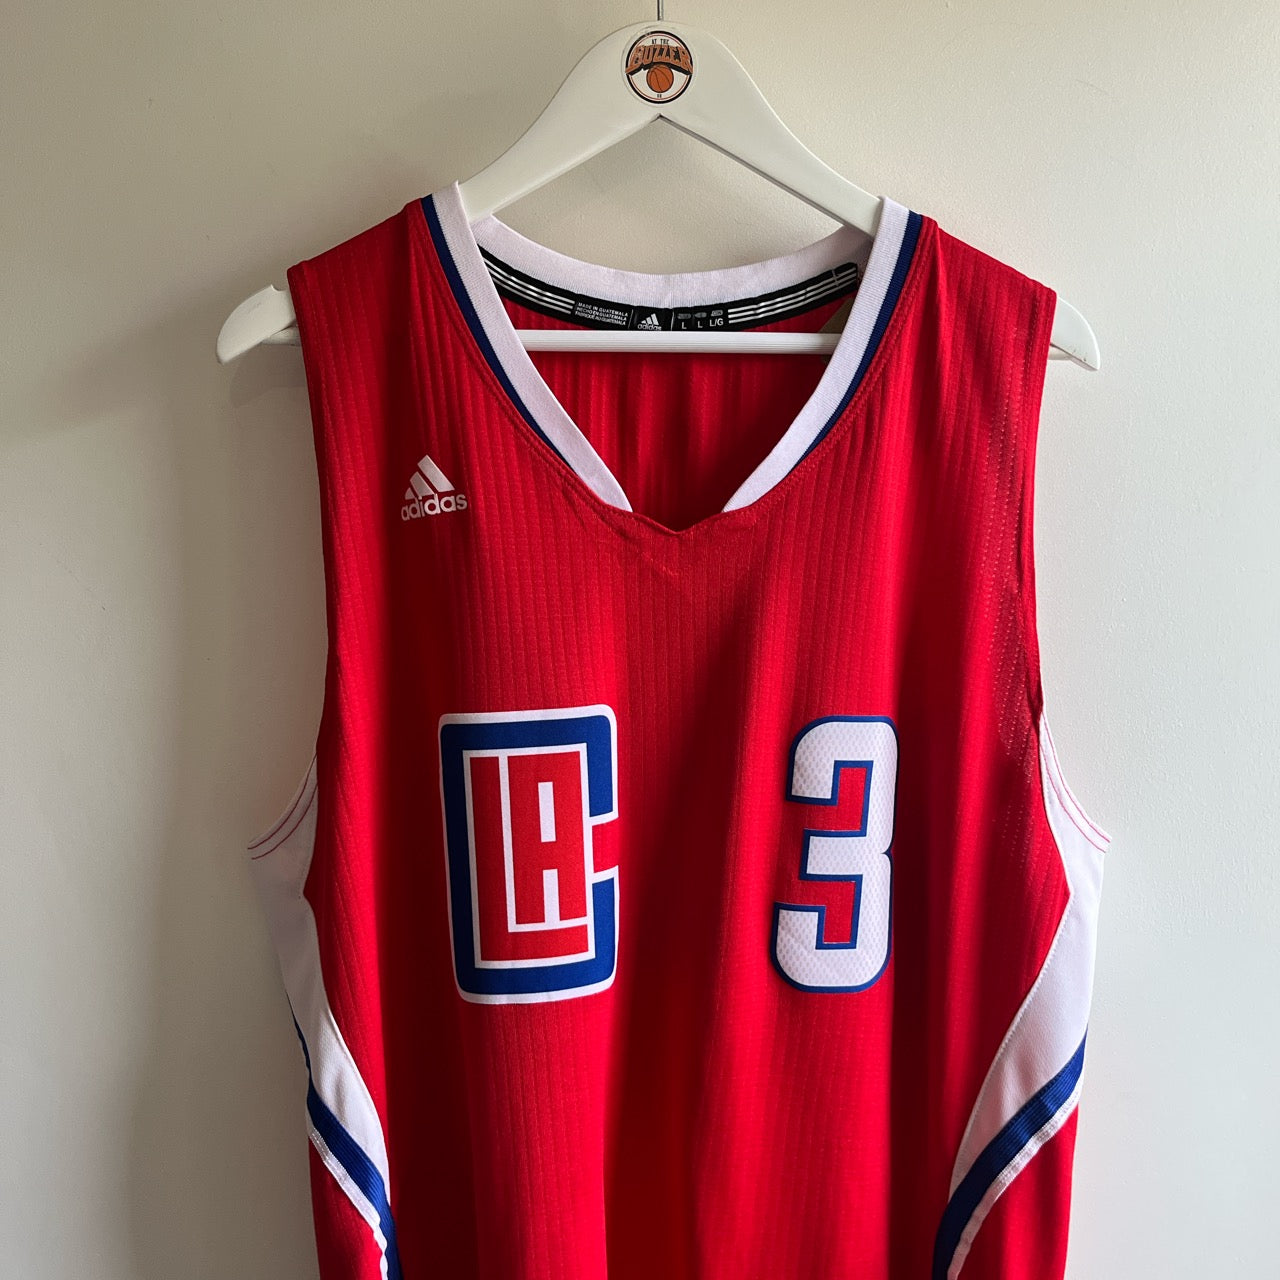 Los Angeles Clippers Chris Paul swingman jersey - Adidas (Large) - At the buzzer UK